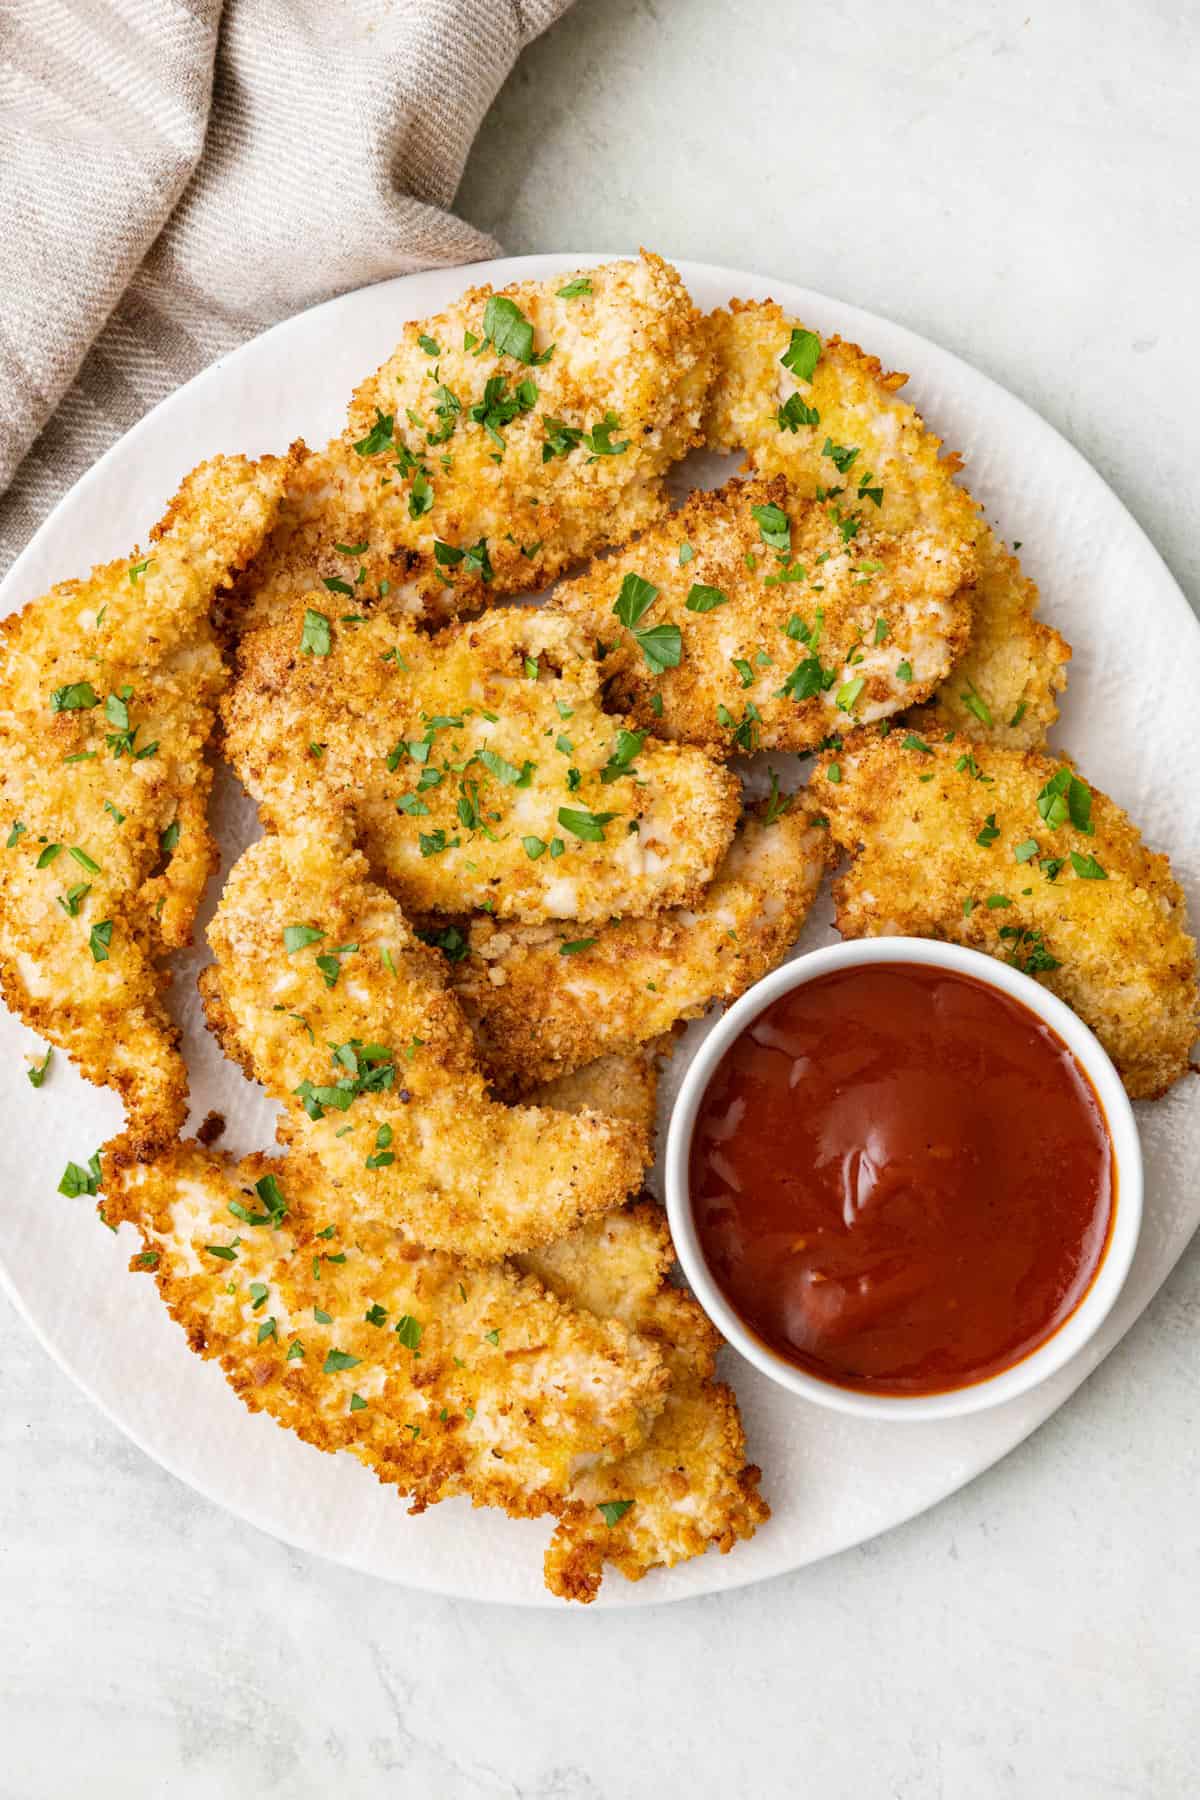 Air fried breadcrumb coated chicken tenders on a round plate garnished with fresh parsley with a small bowl of BBQ sauce for dipping.